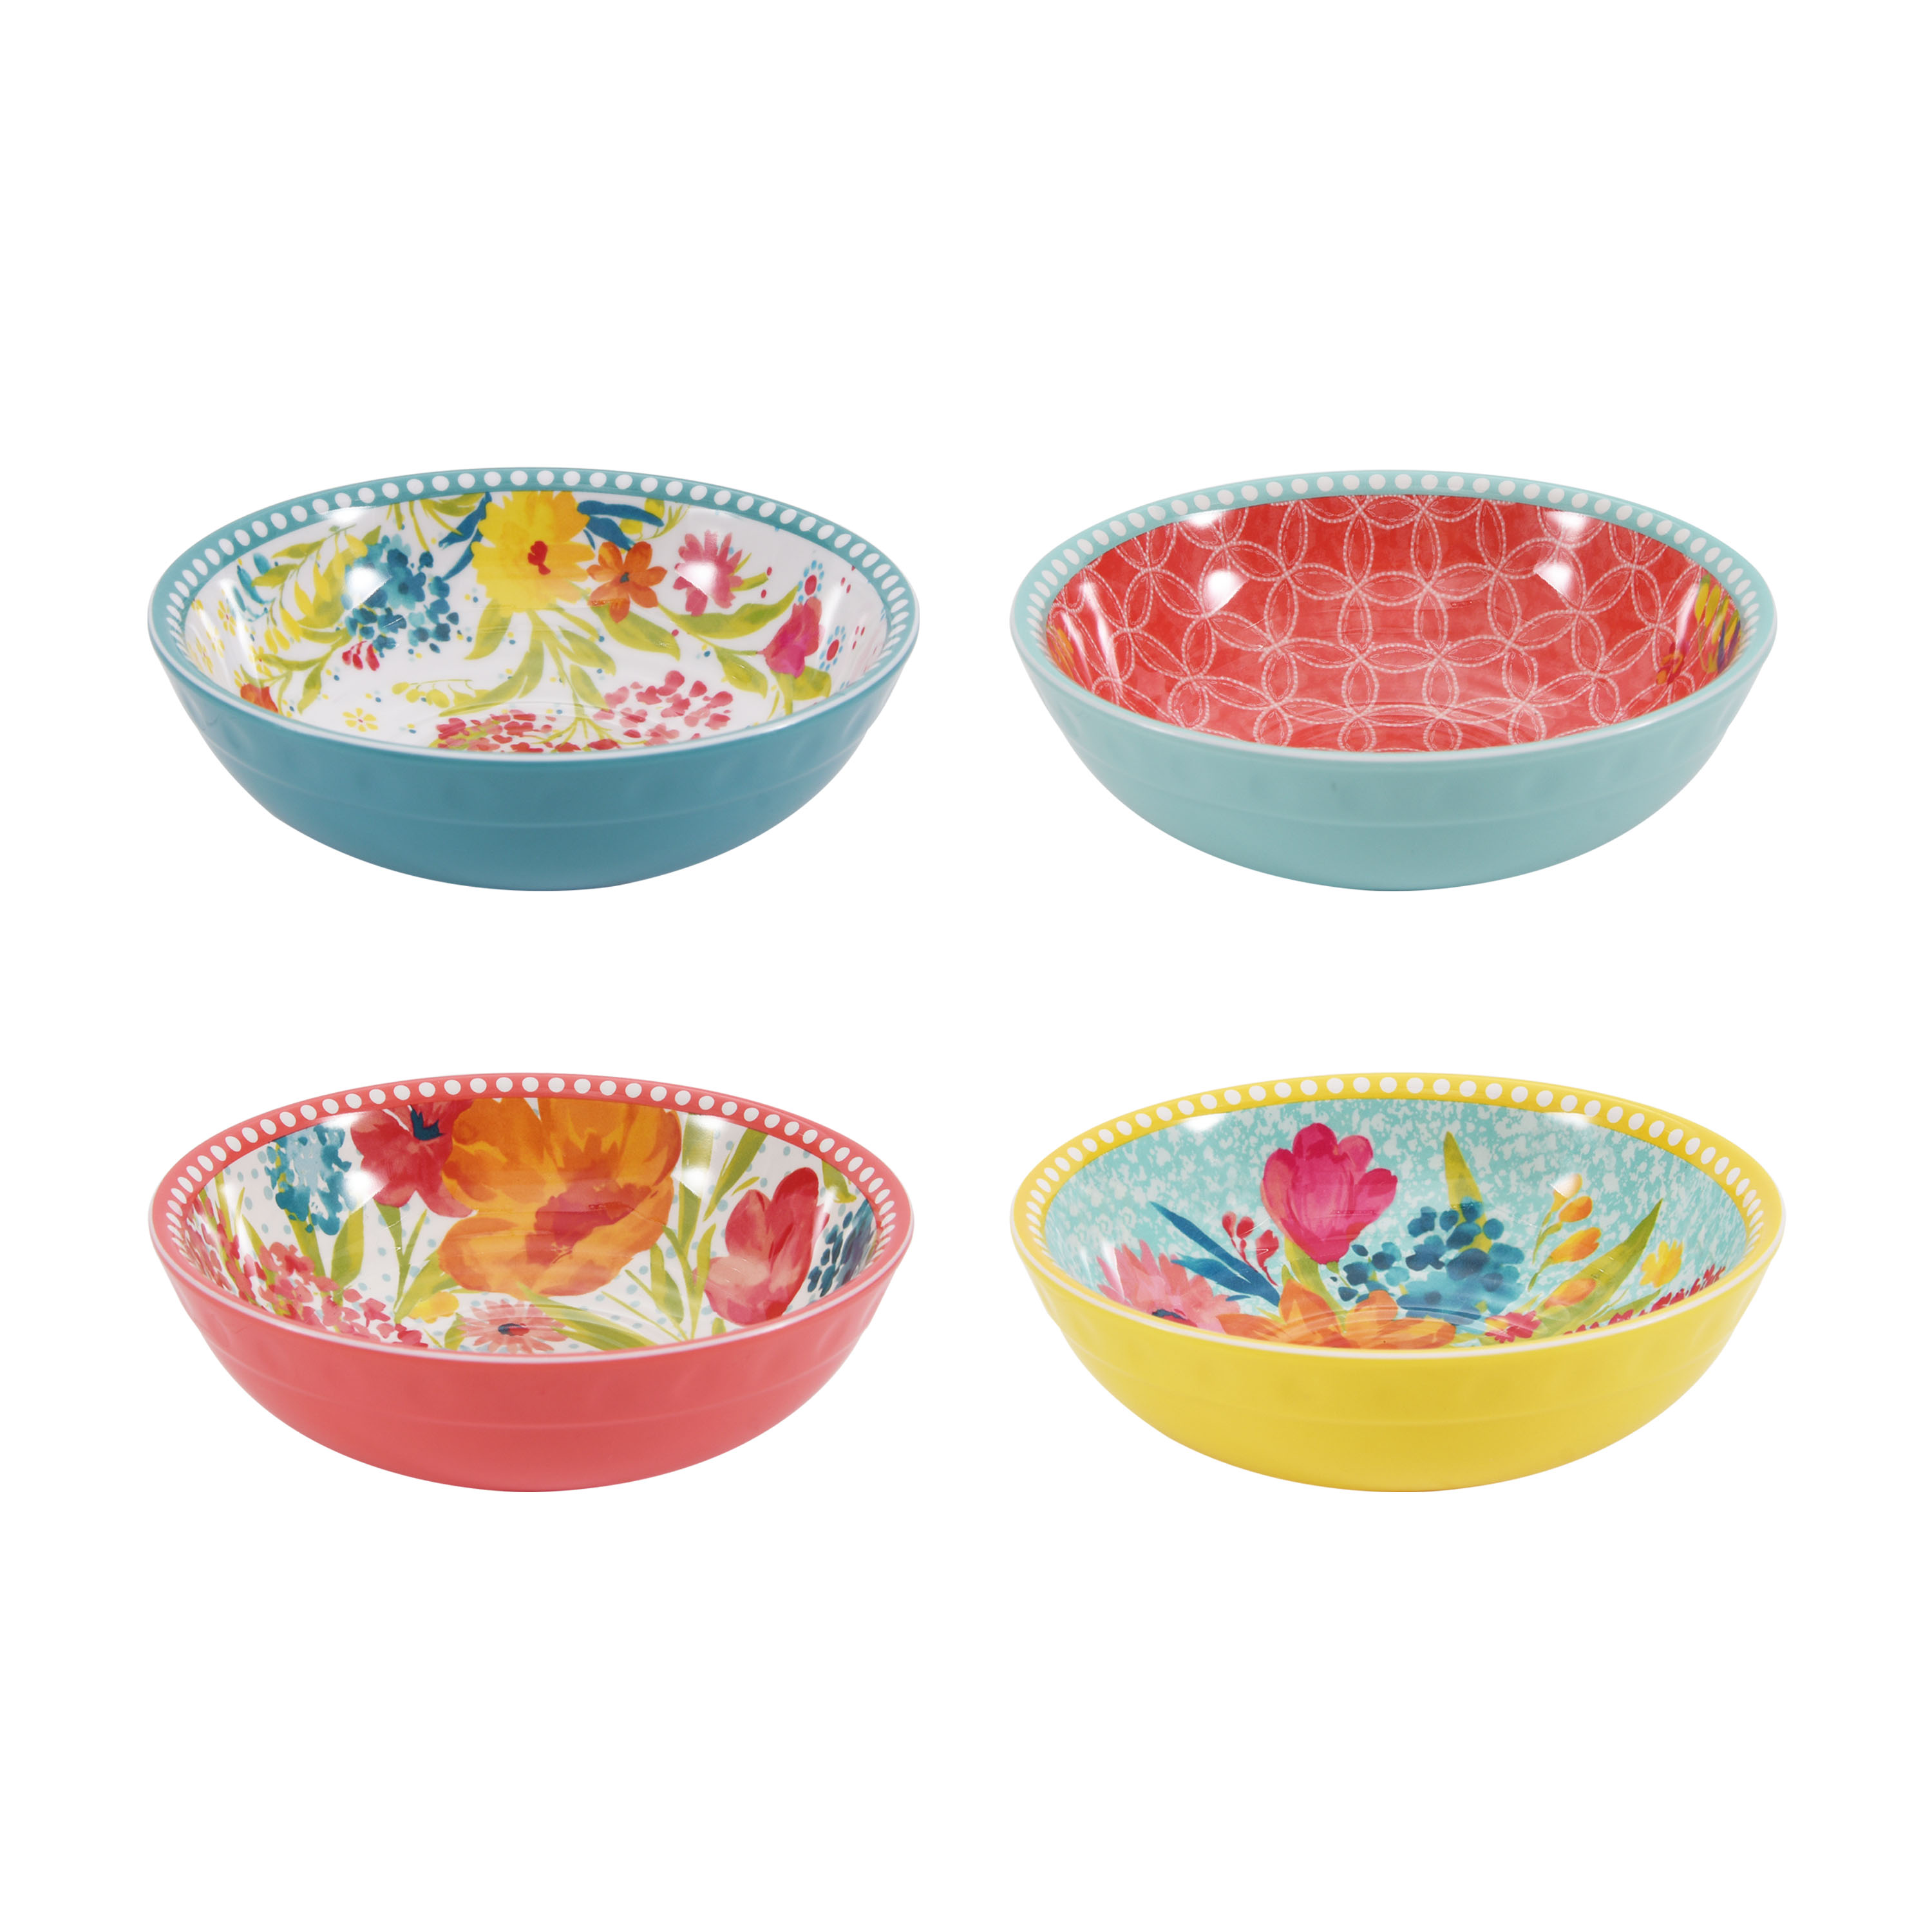 Serving Tray The Pioneer Woman Melamine Chip Bowl 2 Dip Bowls 4 pc Set